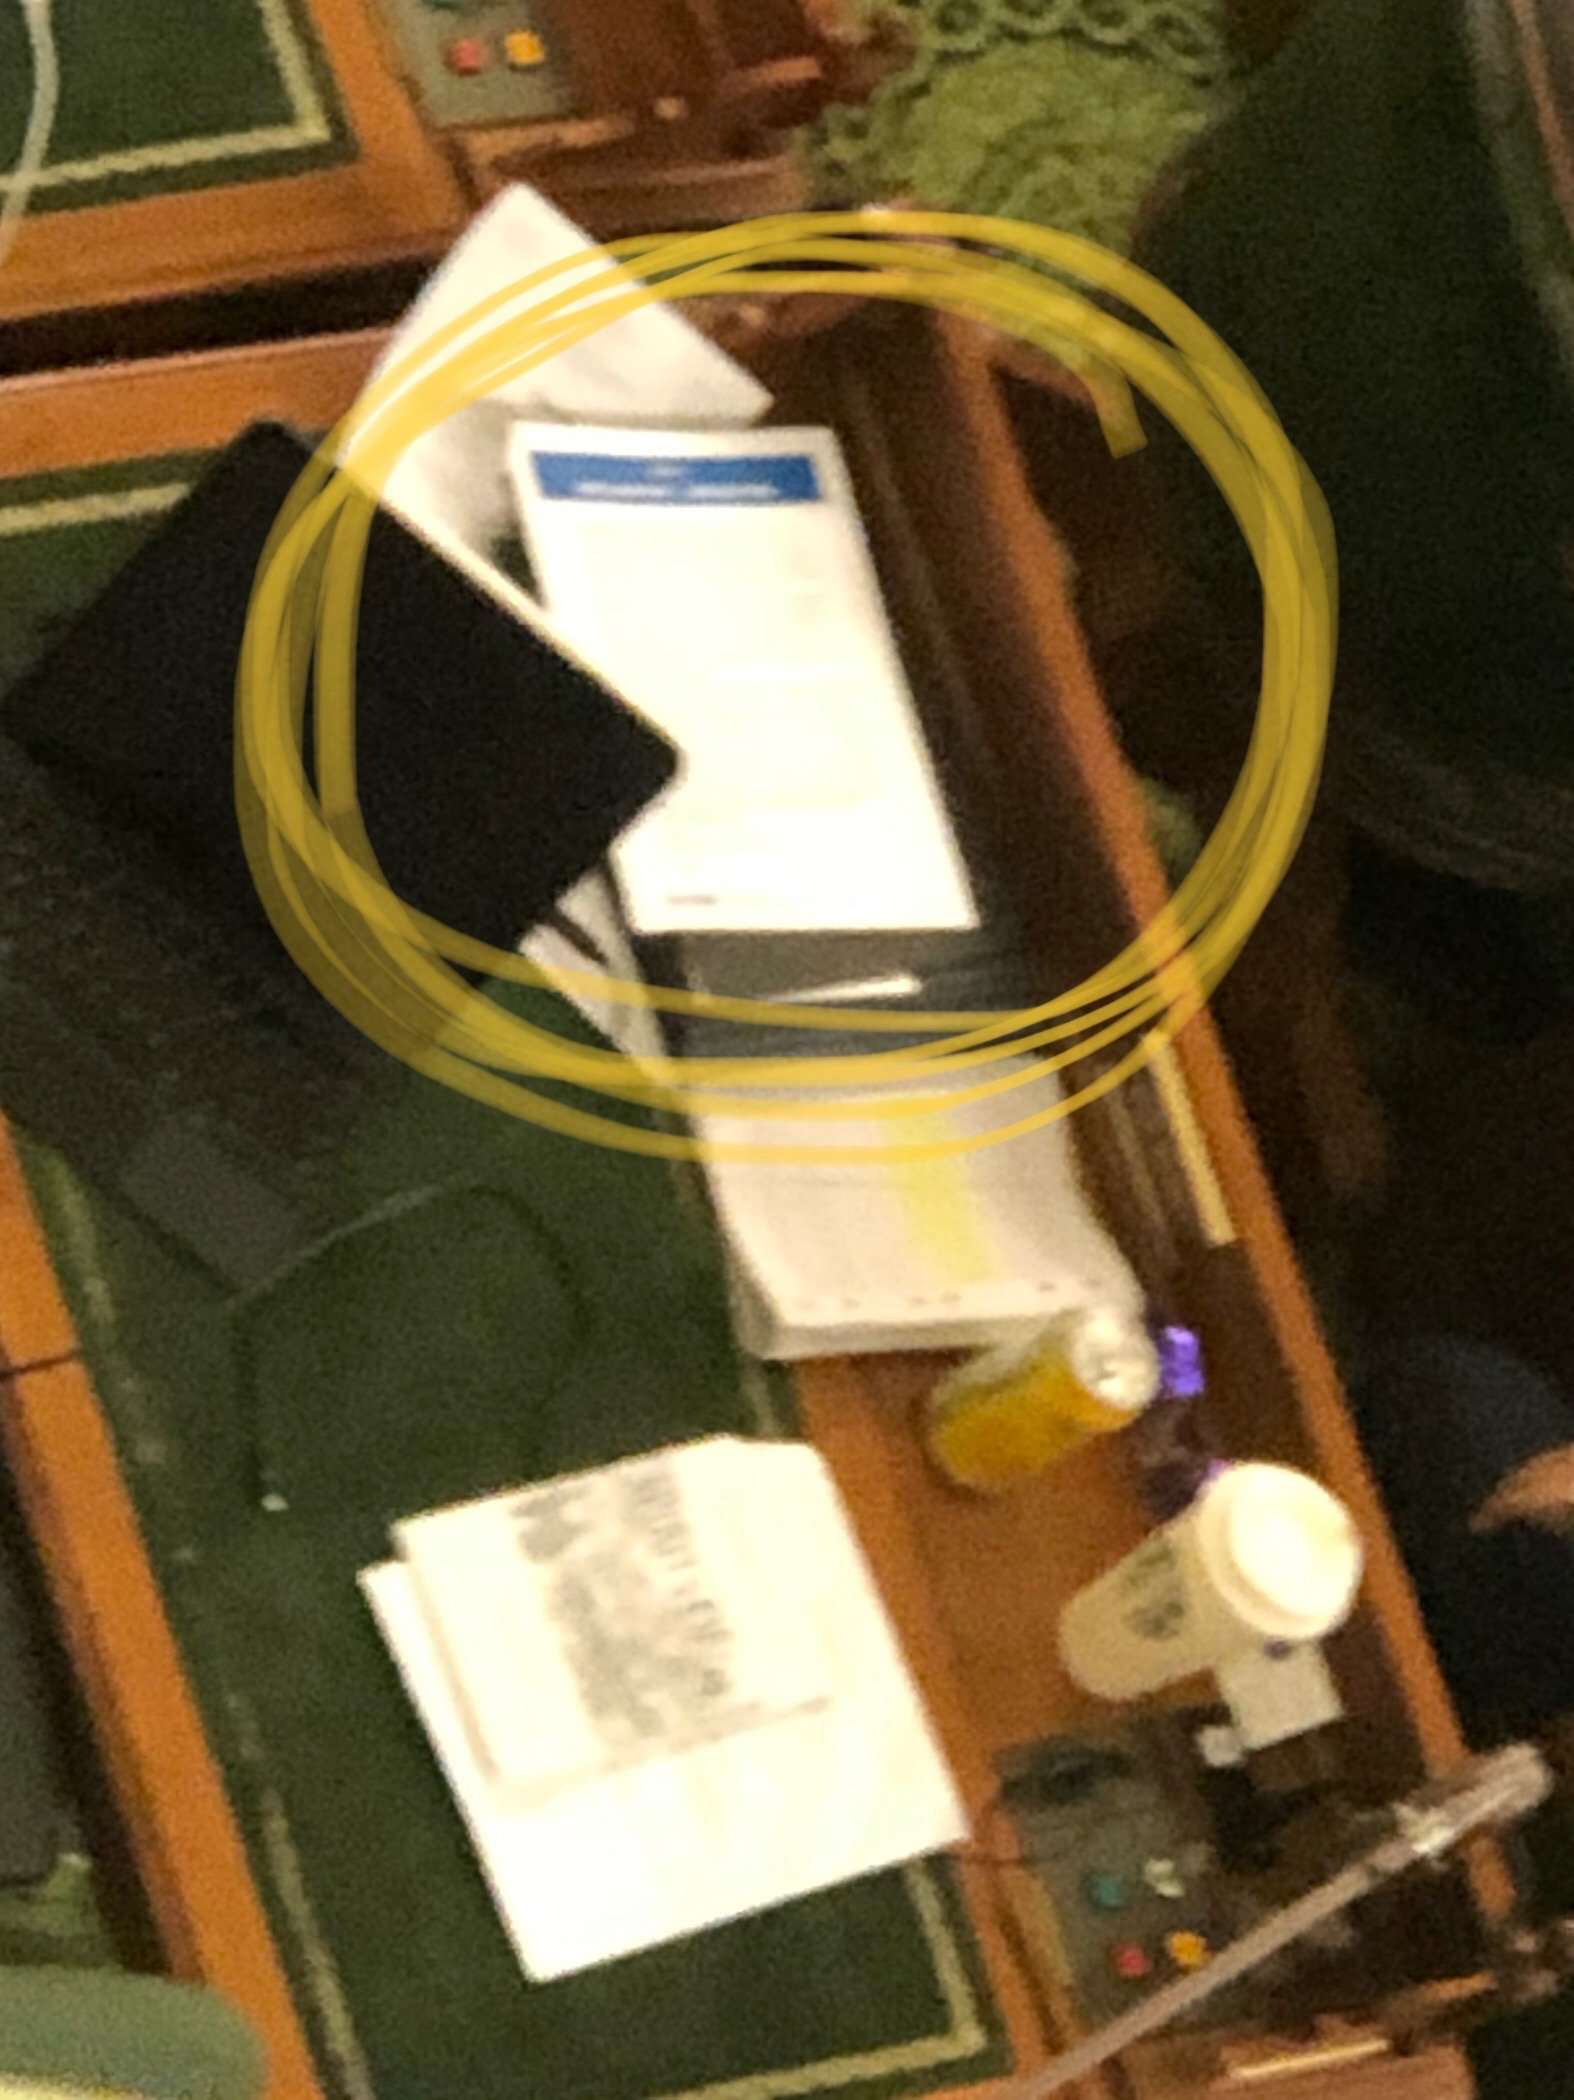 Our declaration spotted on desks of Assembly floor.